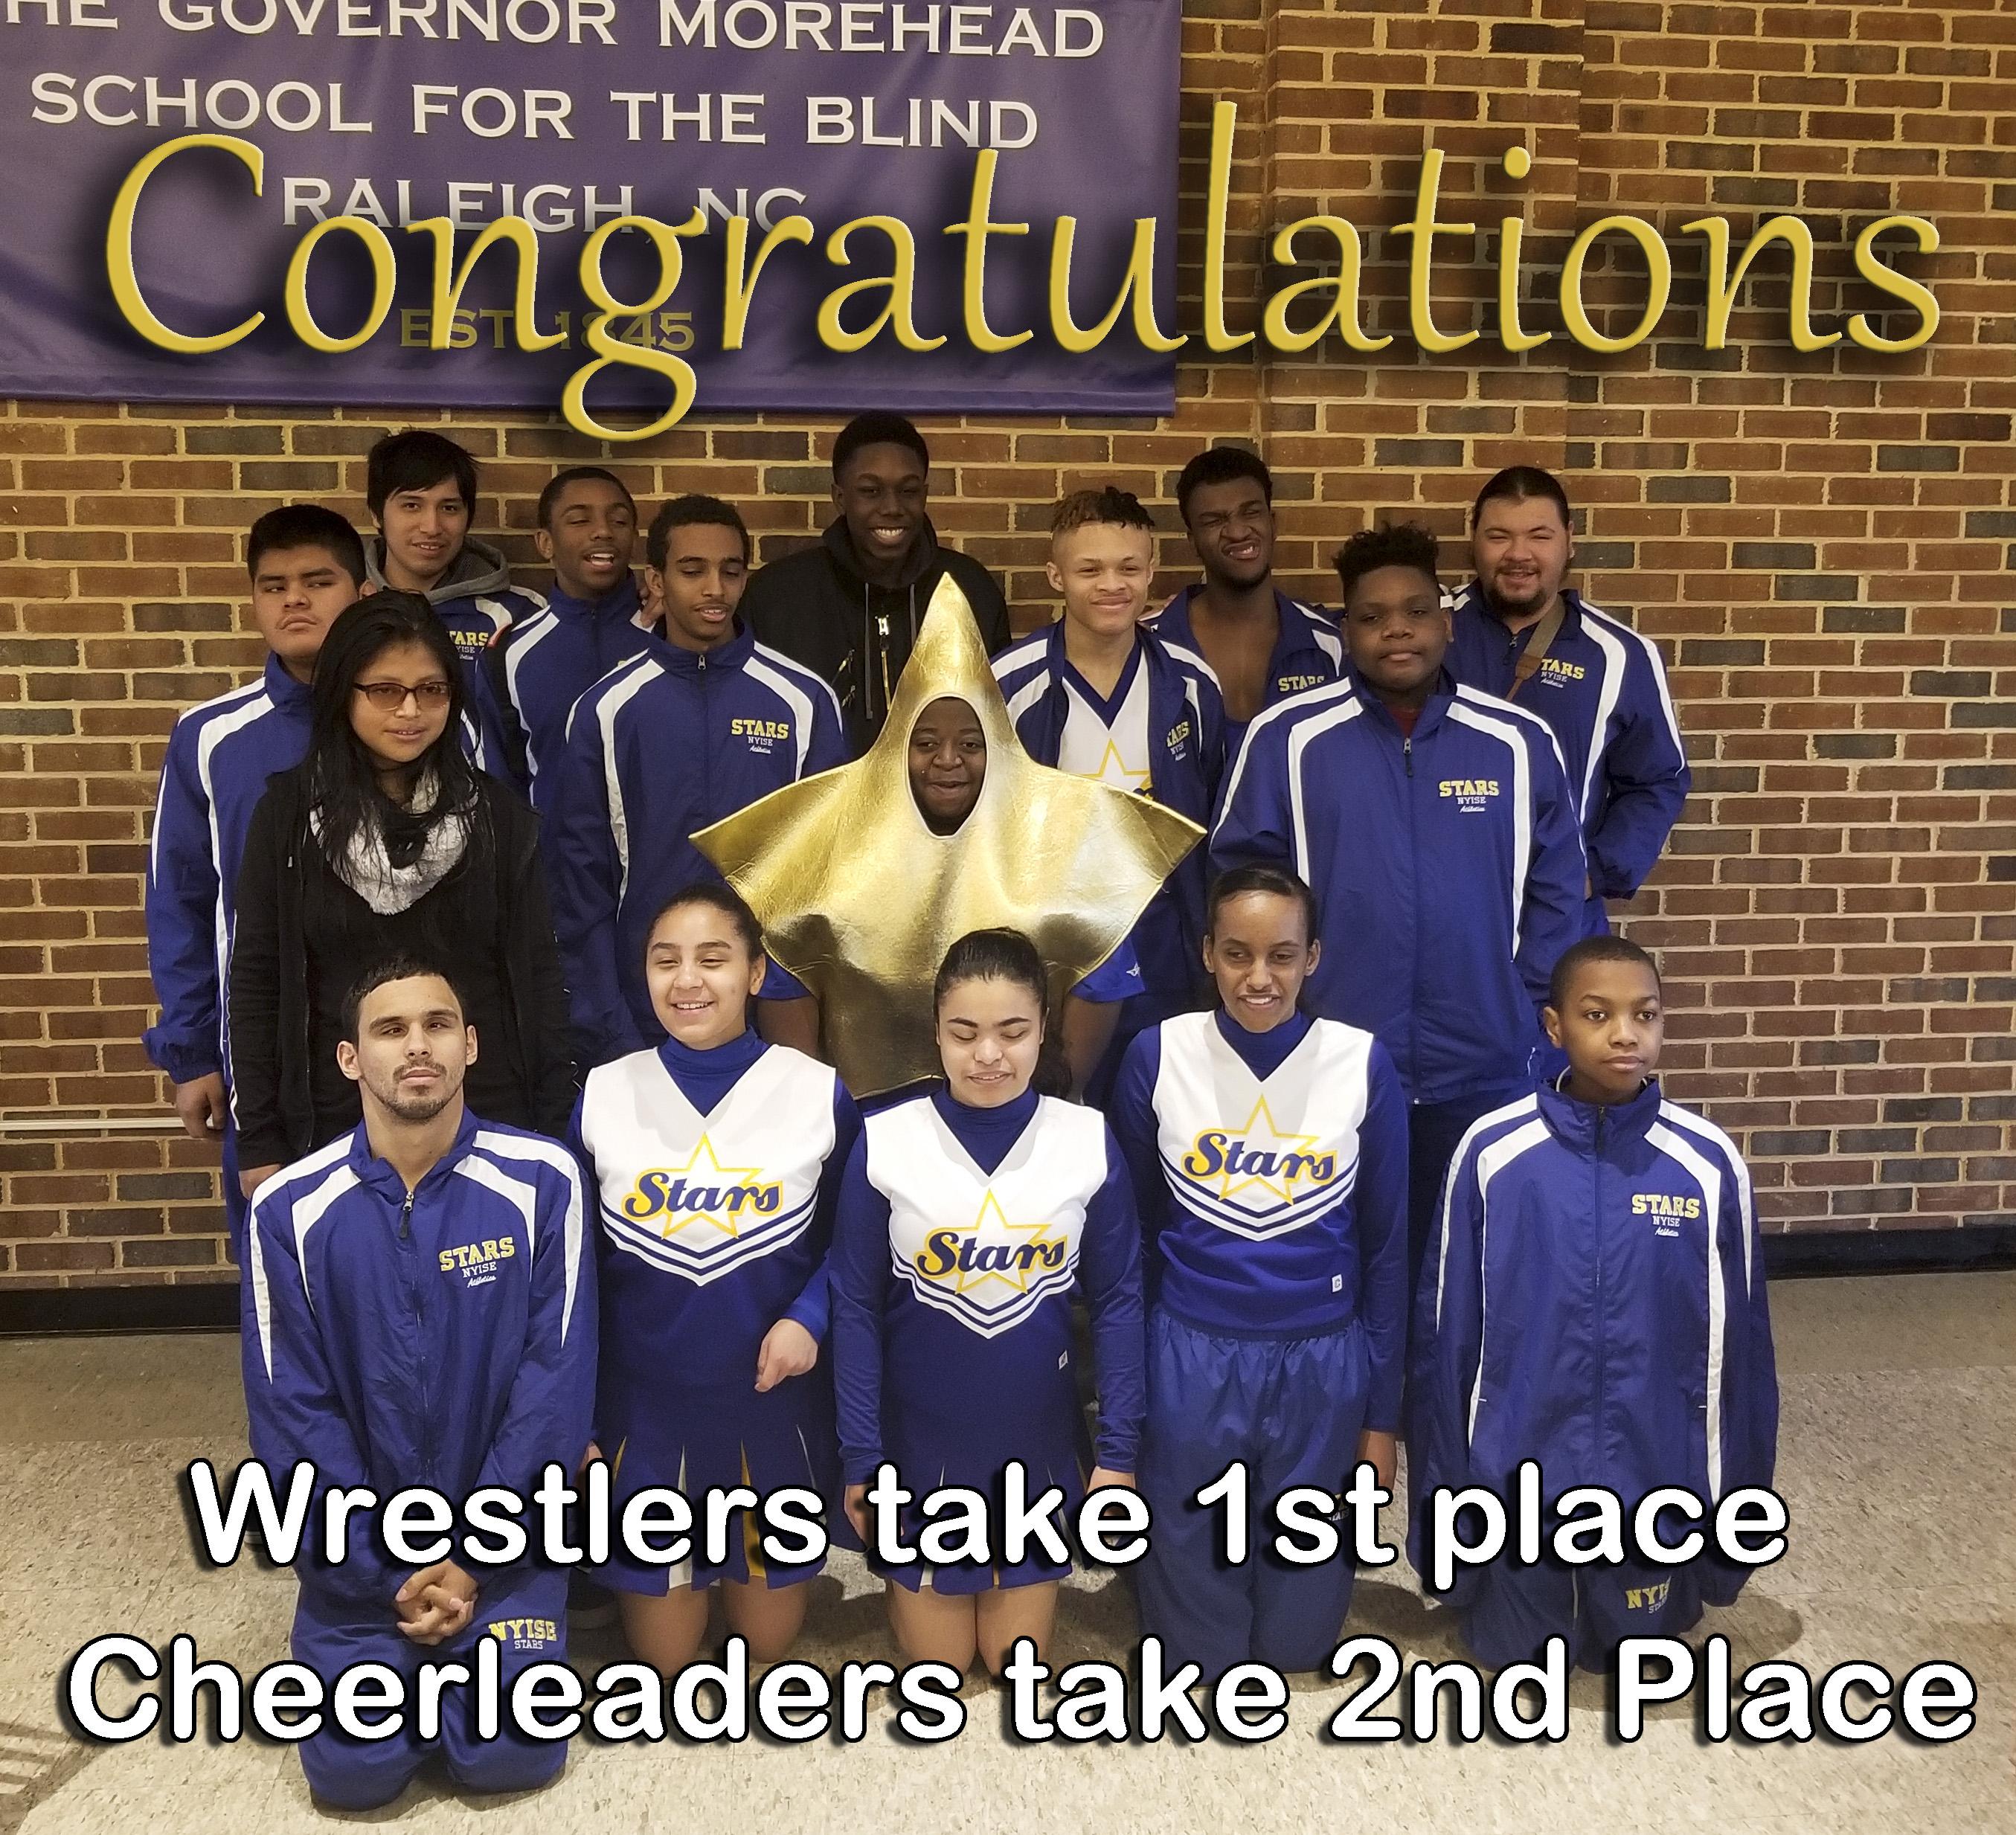 Congratulations to the wrestling and cheerleading teams. 